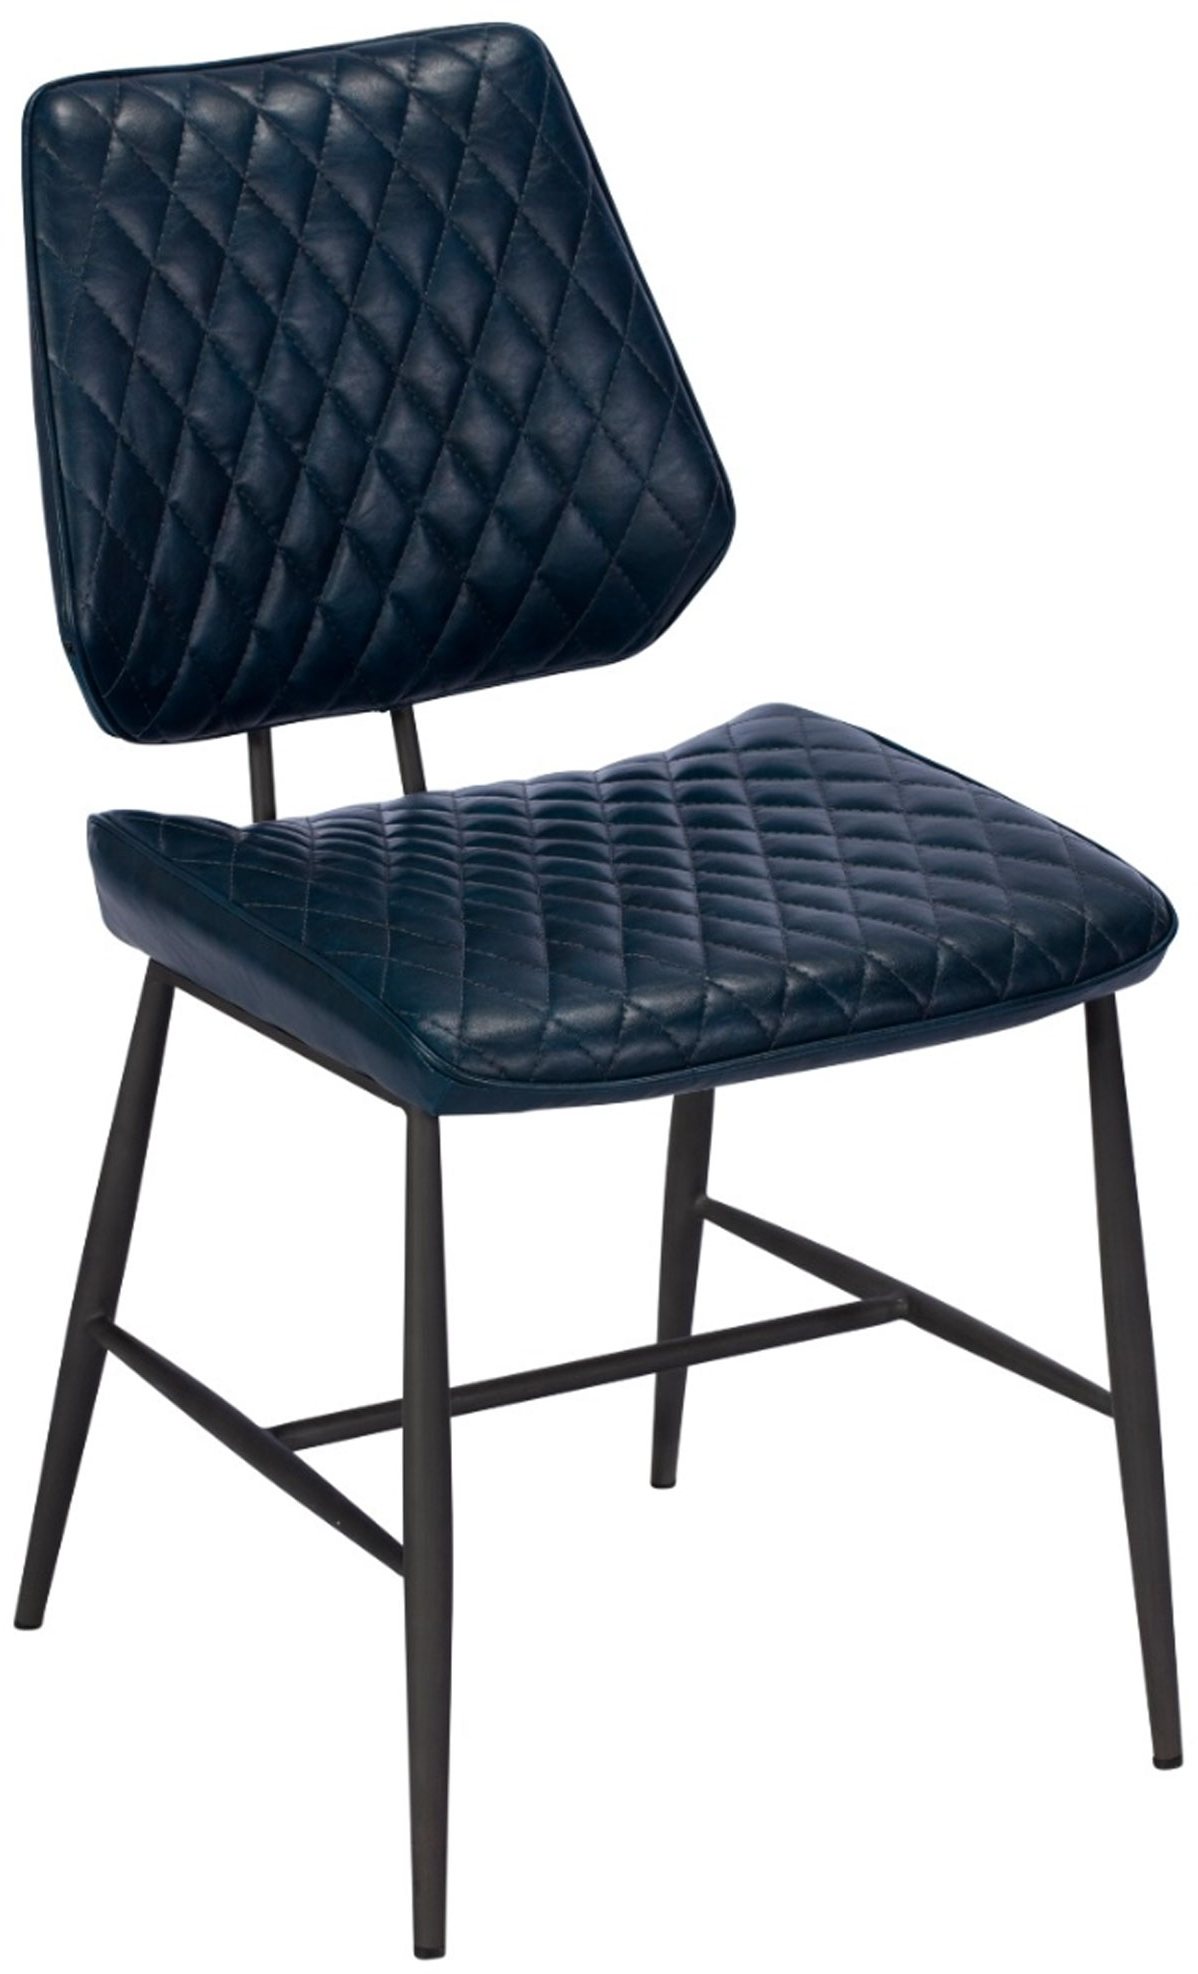 Dalton Dining Chair In Dark Blue Faux, Blue Leather Dining Chairs Uk